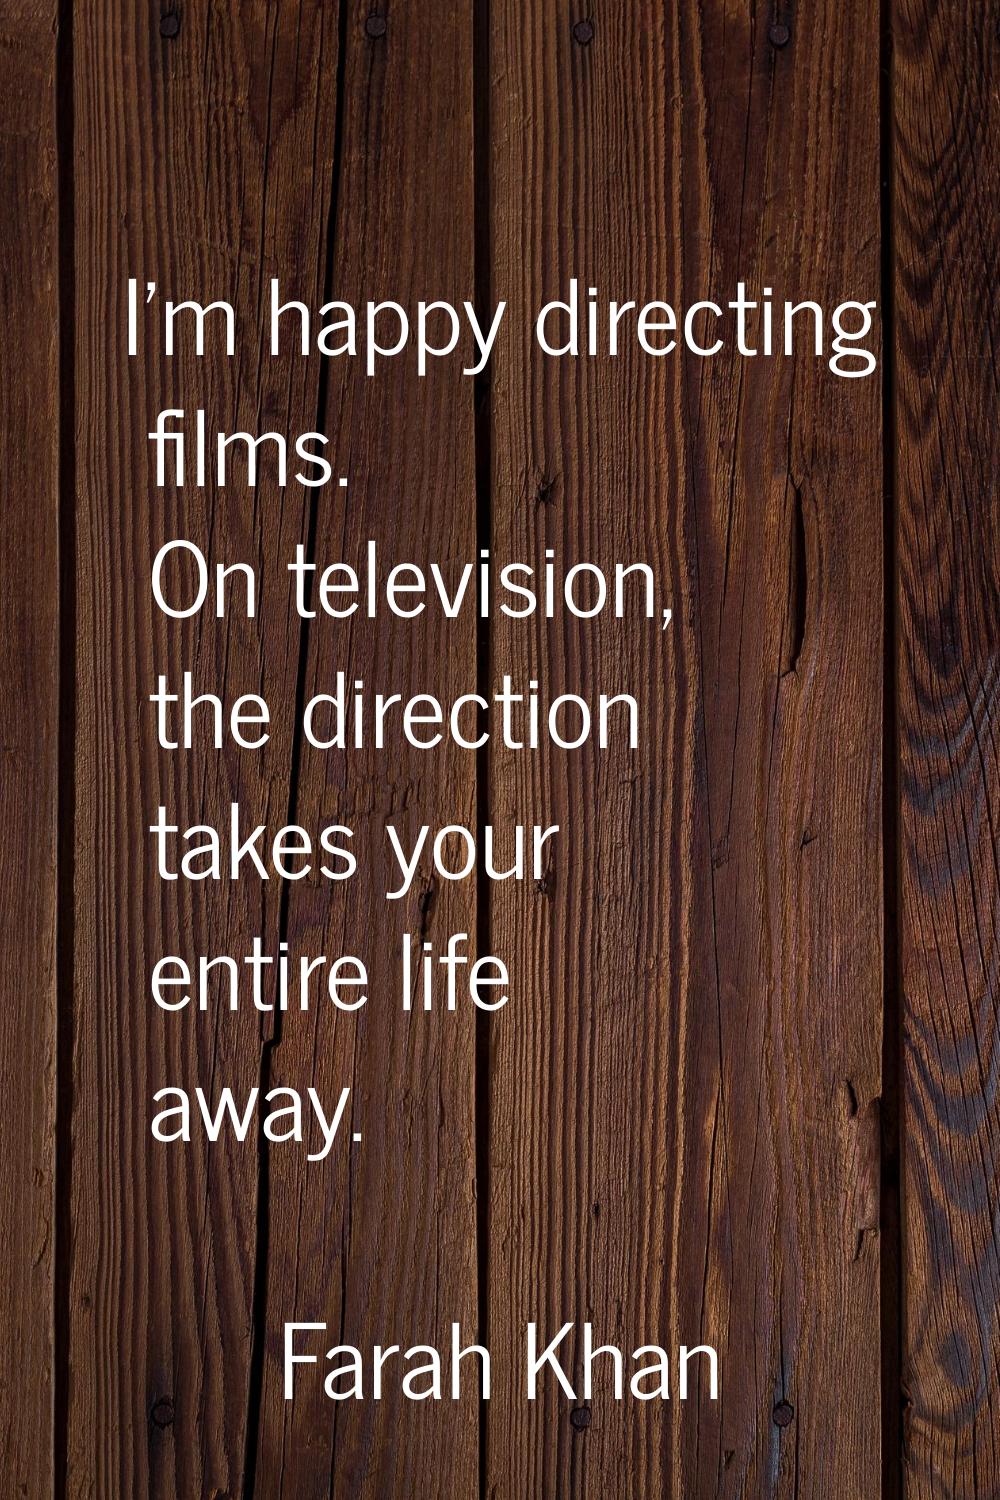 I'm happy directing films. On television, the direction takes your entire life away.